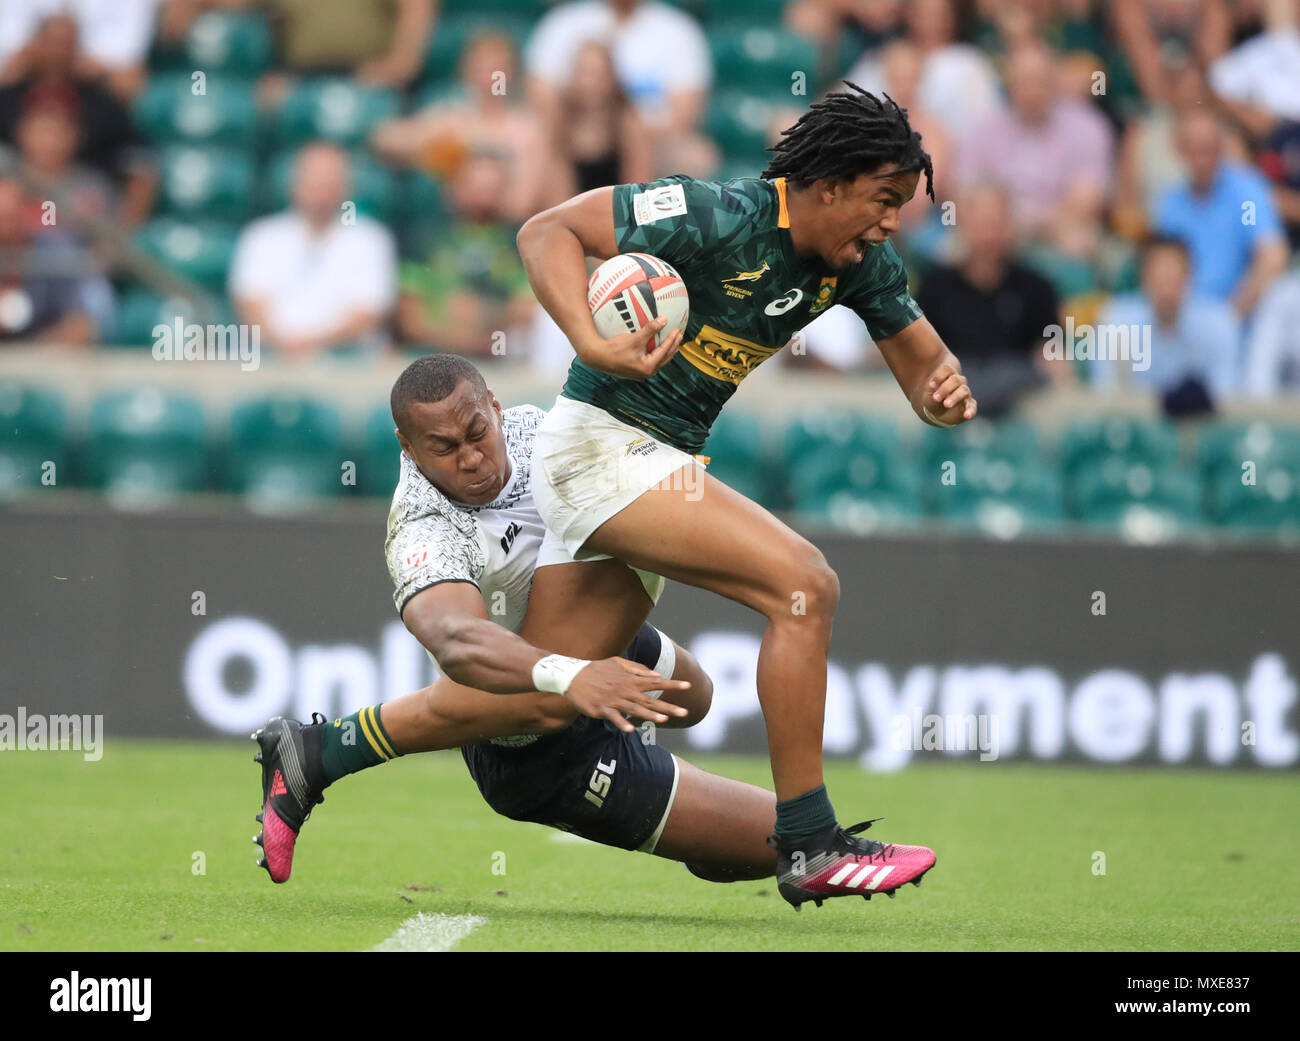 South Africa's Stedman Gans breaks through to score a try against Fiji during day two of the HSBC London Sevens at Twickenham Stadium, London. Stock Photo